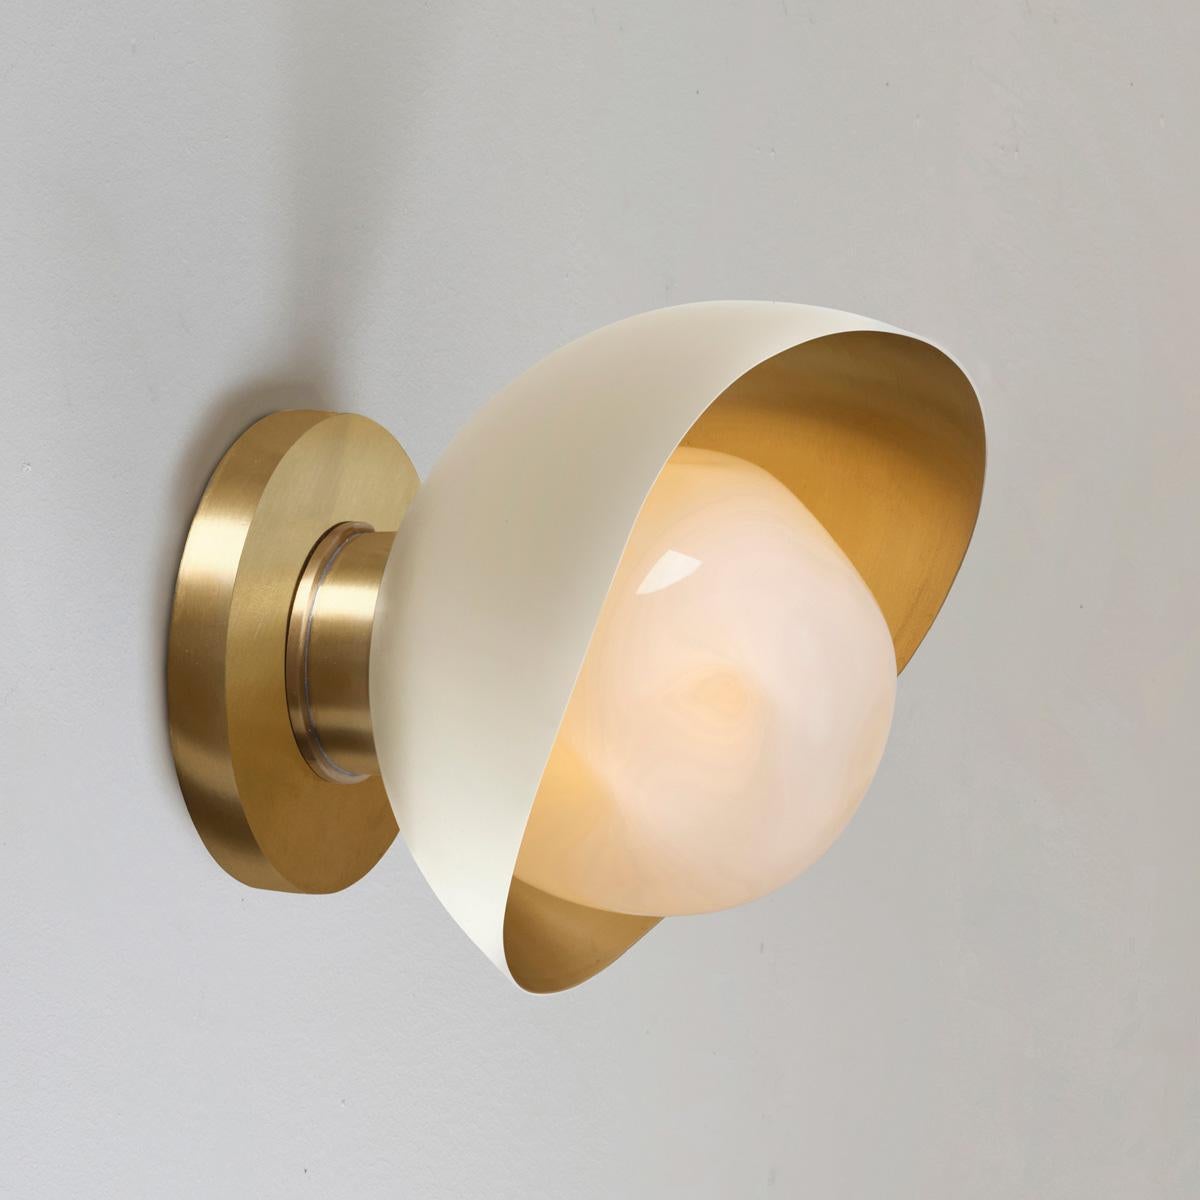 The Perla Mini wall light is the smallest member of the Perla collection featuring an organic brass shell nestling our Sfera glass handblown in Murano. See the Perla and Perla Grande for larger models.

The primary images show it in Sand White and